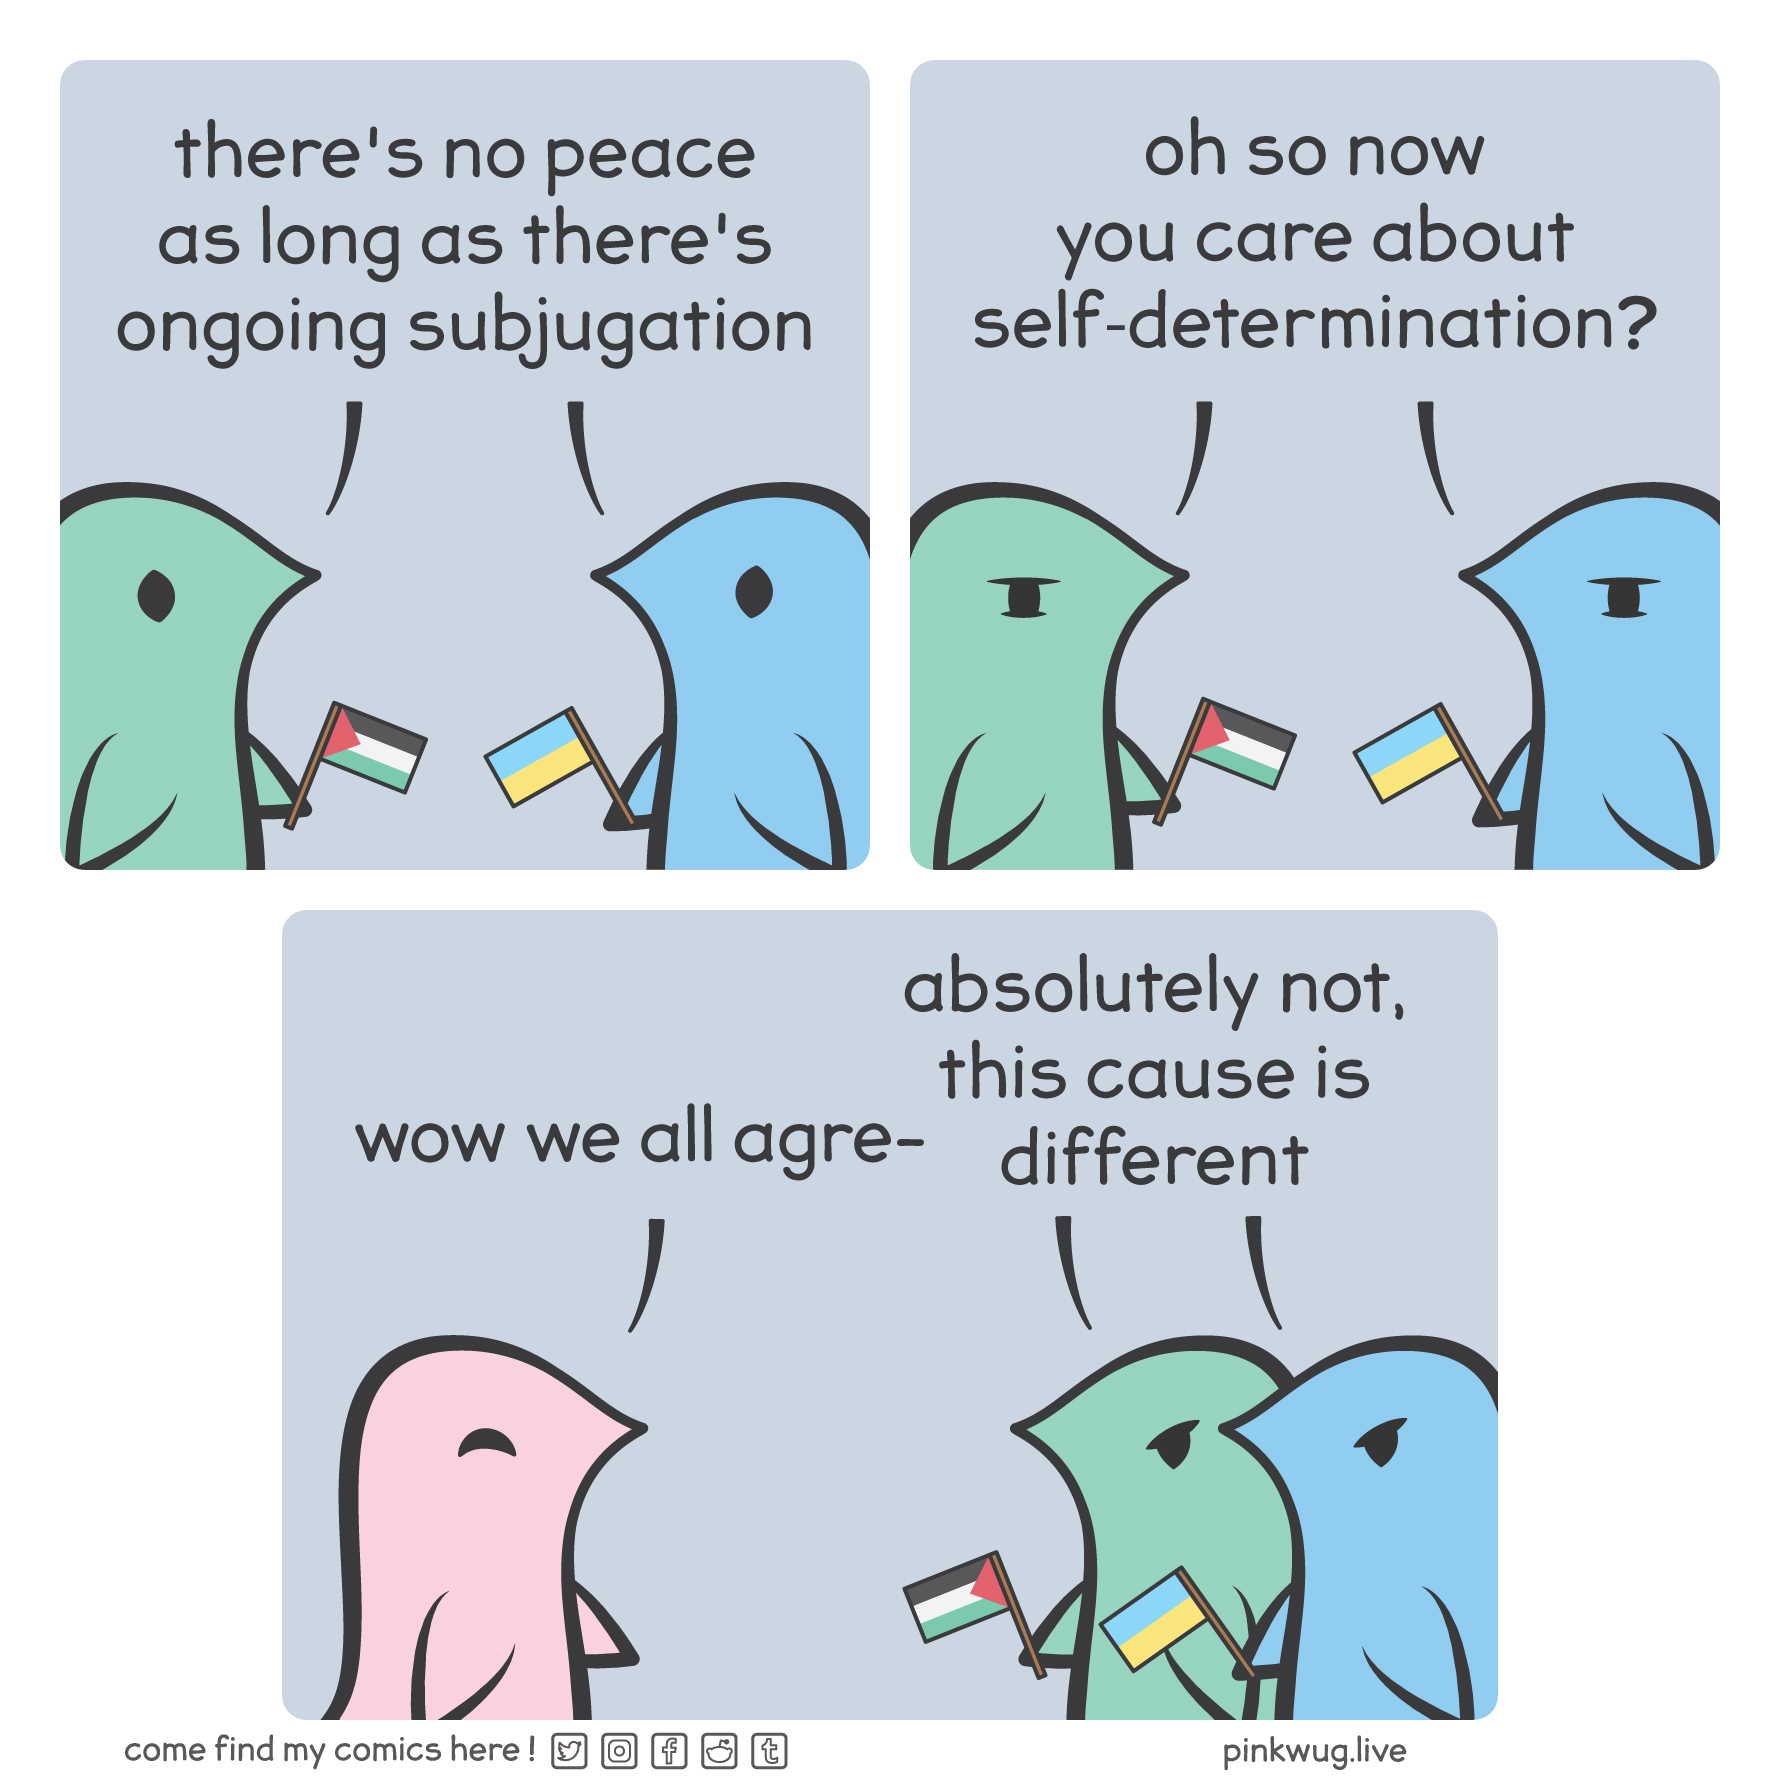 pinkwug comic: Panel 1: On the left, a green wug holding a Palestine flag, on the right, a blue wug holding an Ukraine flag. They both say: "there's no peace as long as there's ongoing subjugation".

Panel 2: They both say: "oh so now you care about self-determination".

Panel 3: A smiling pink wug says: "wow we all agre-". The green wug and the blue wug both say: "absolutely not, this cause is different"